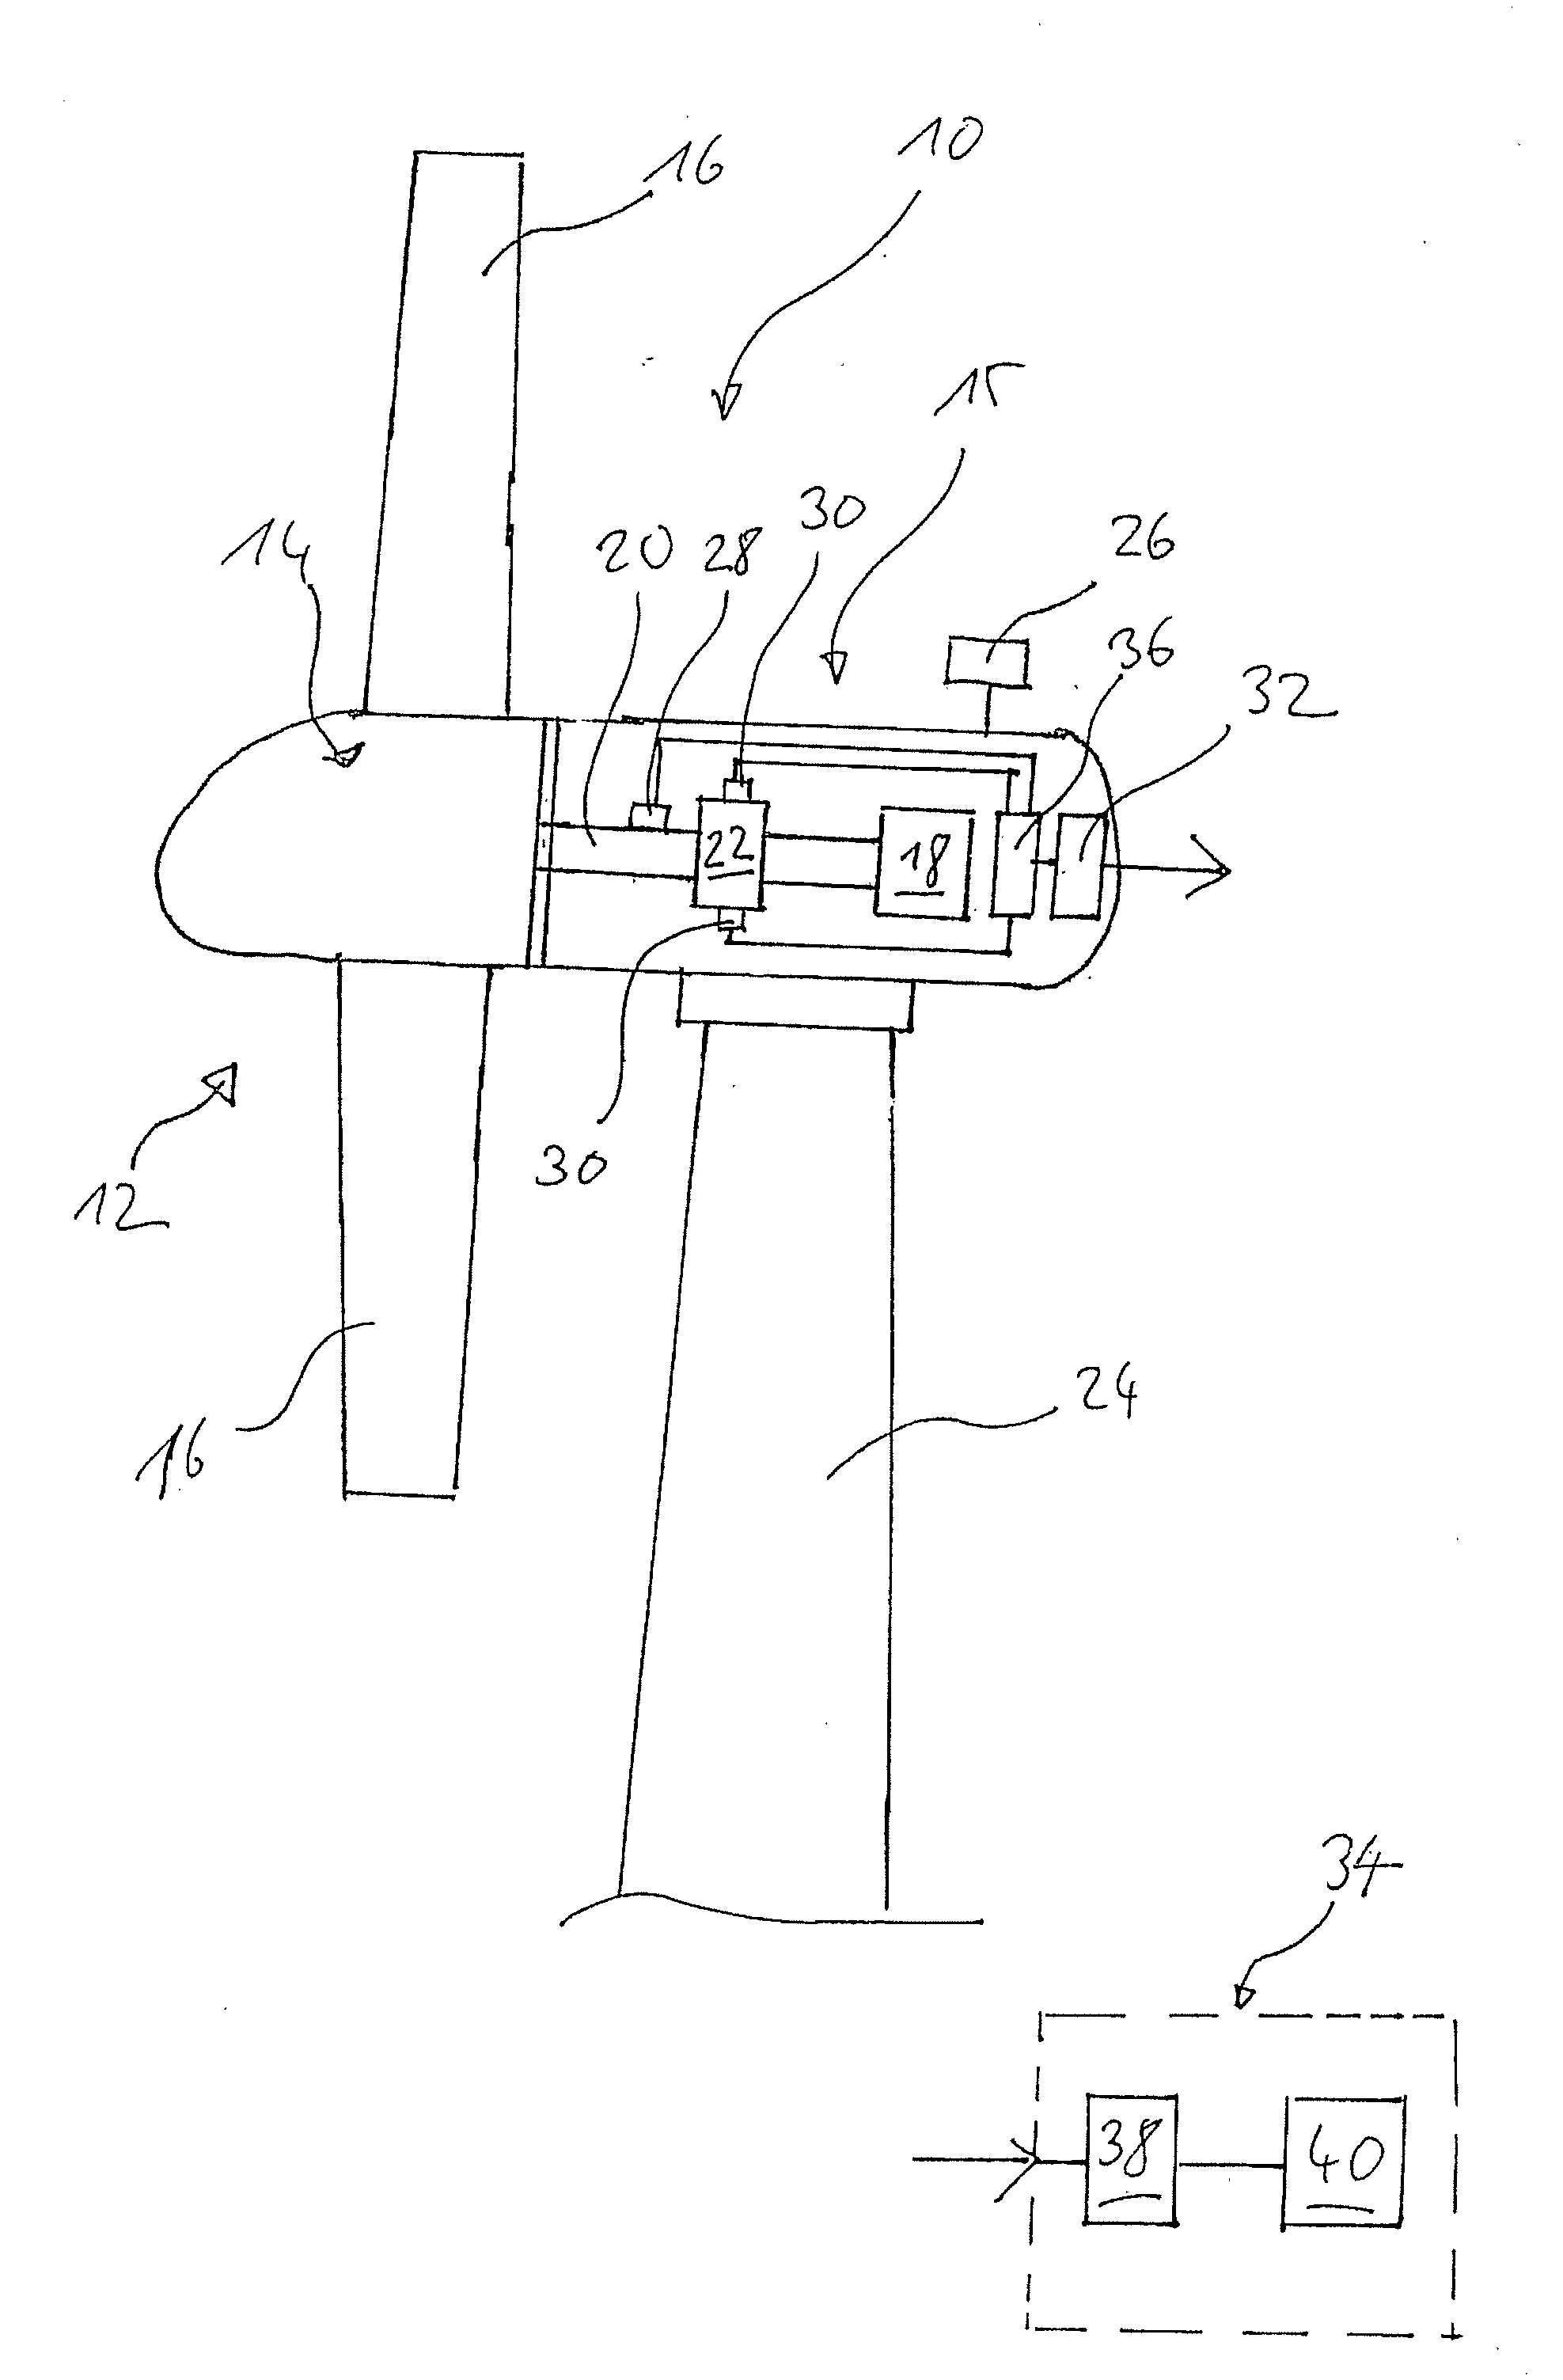 Process for monitoring a drive train component of a wind power plant